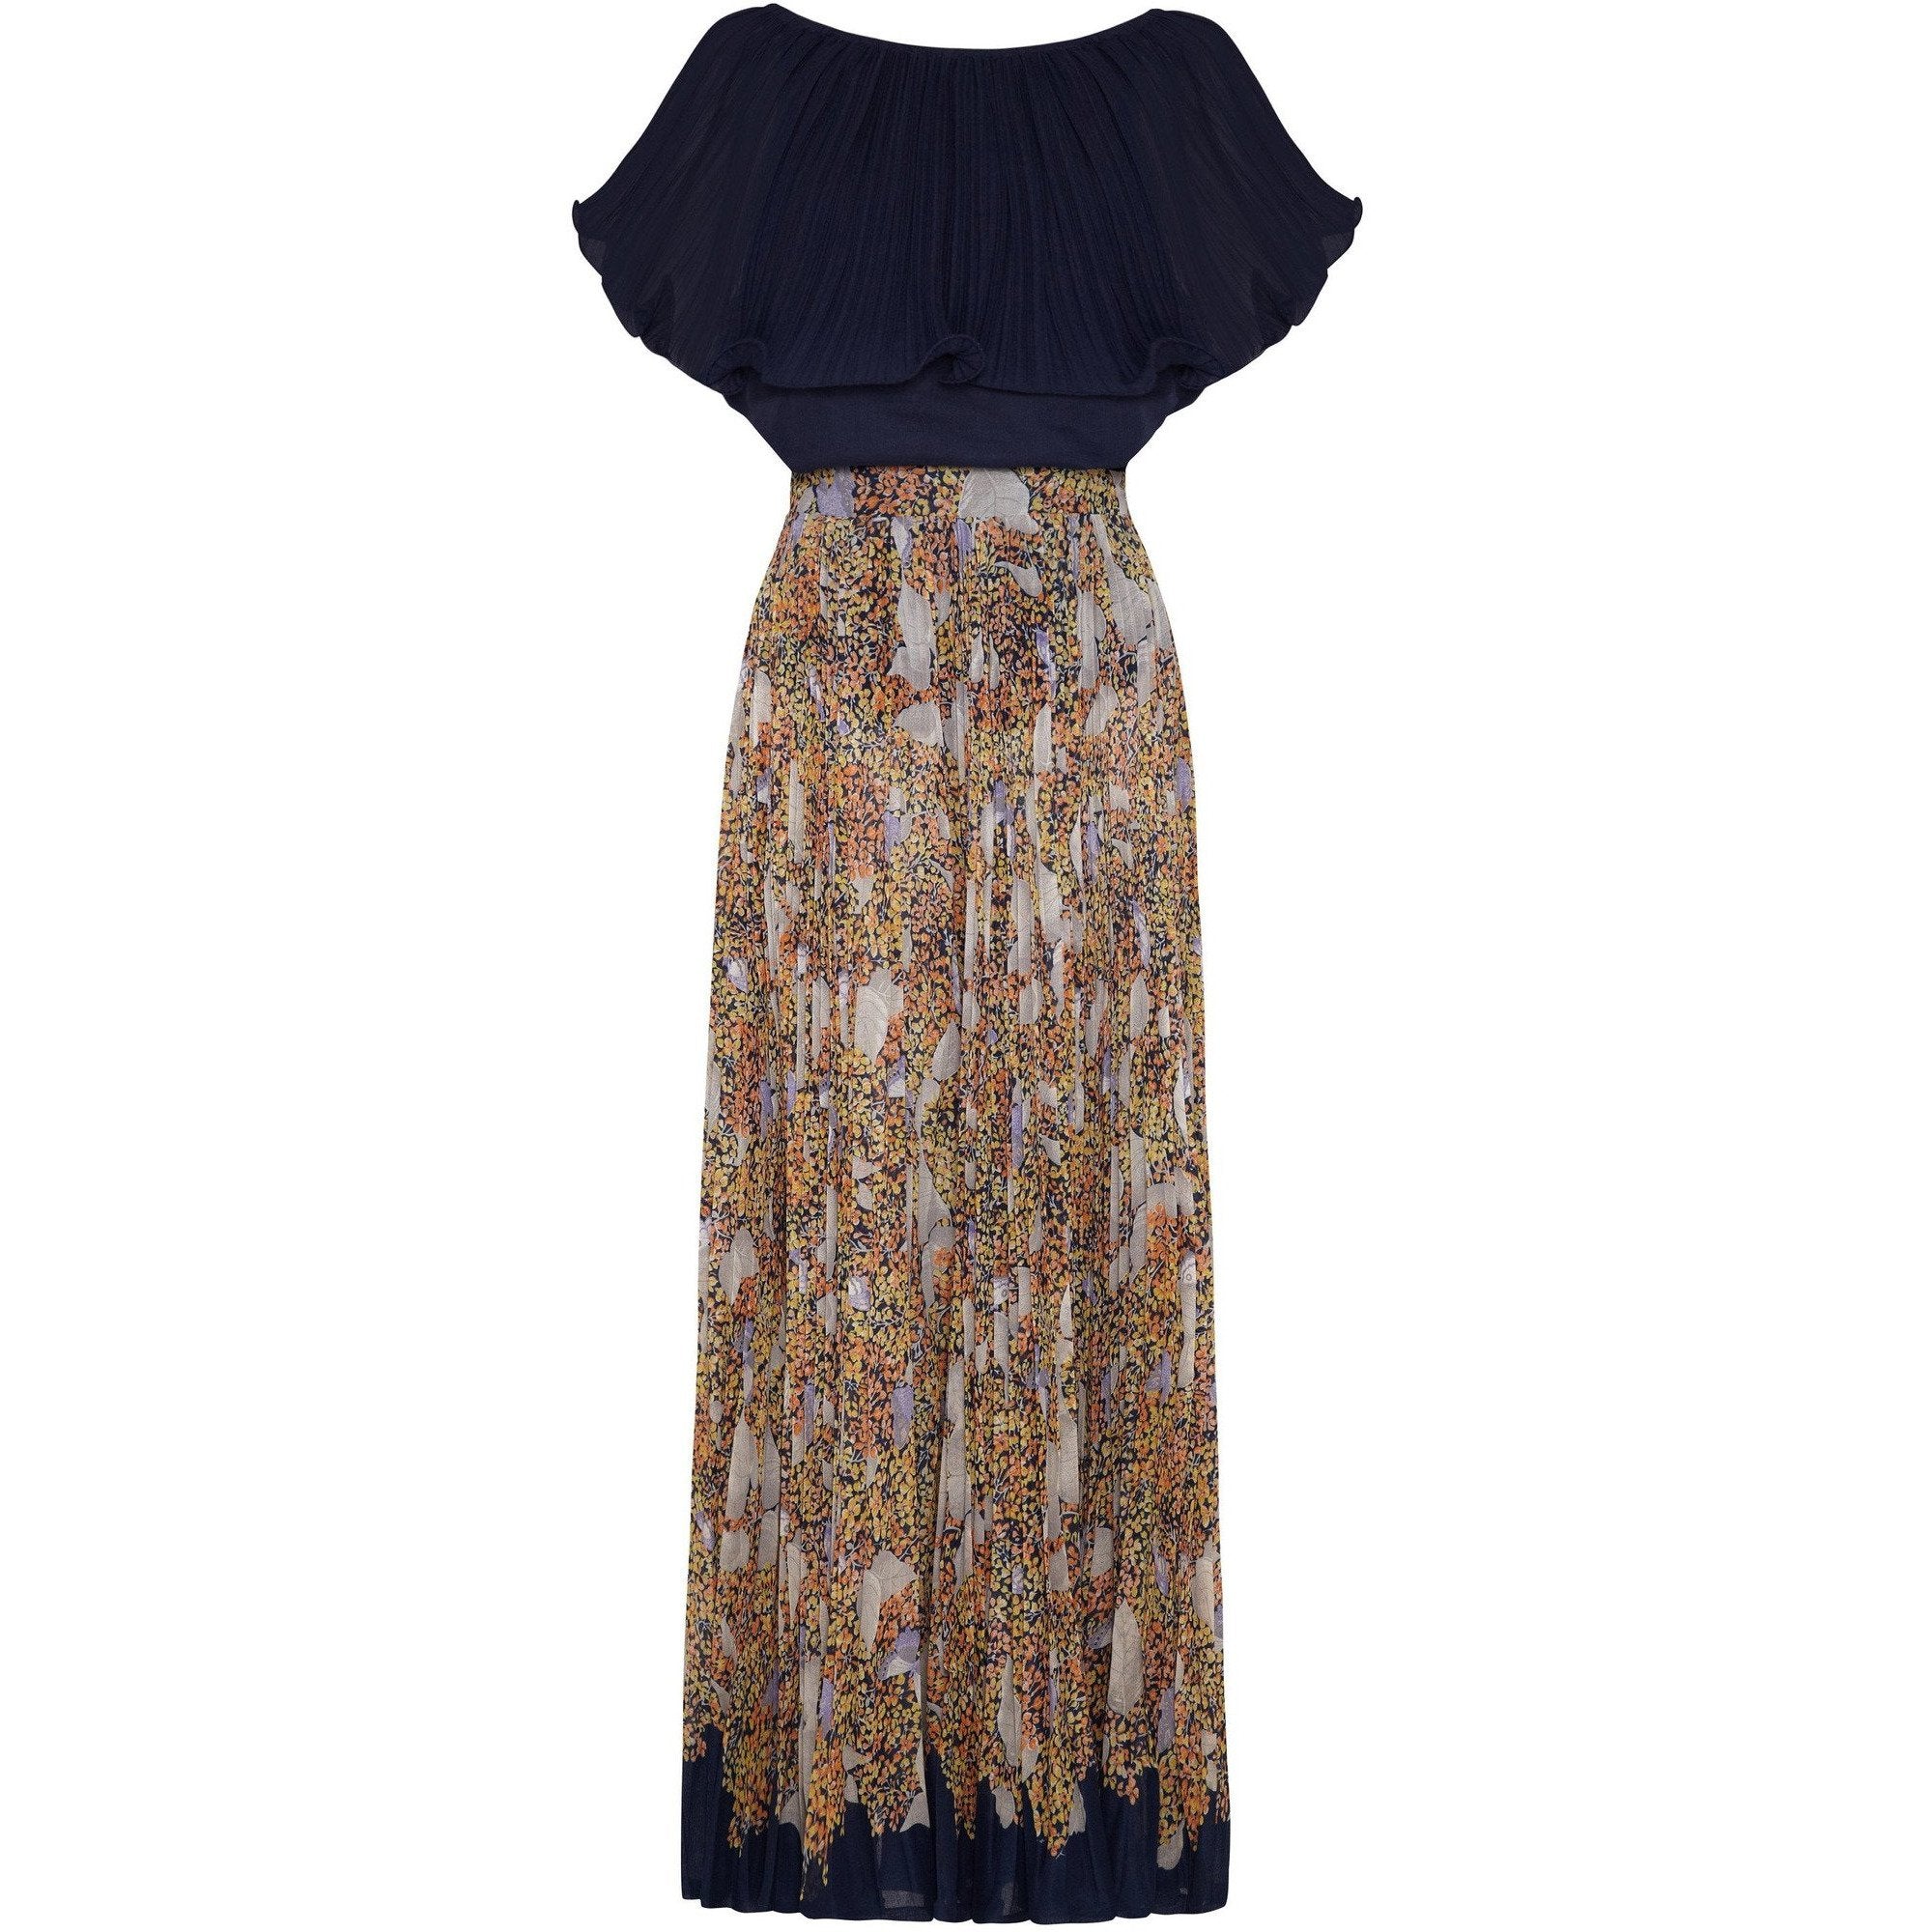 1970s Pleated Cotton Maxi Skirt and Navy Top Set